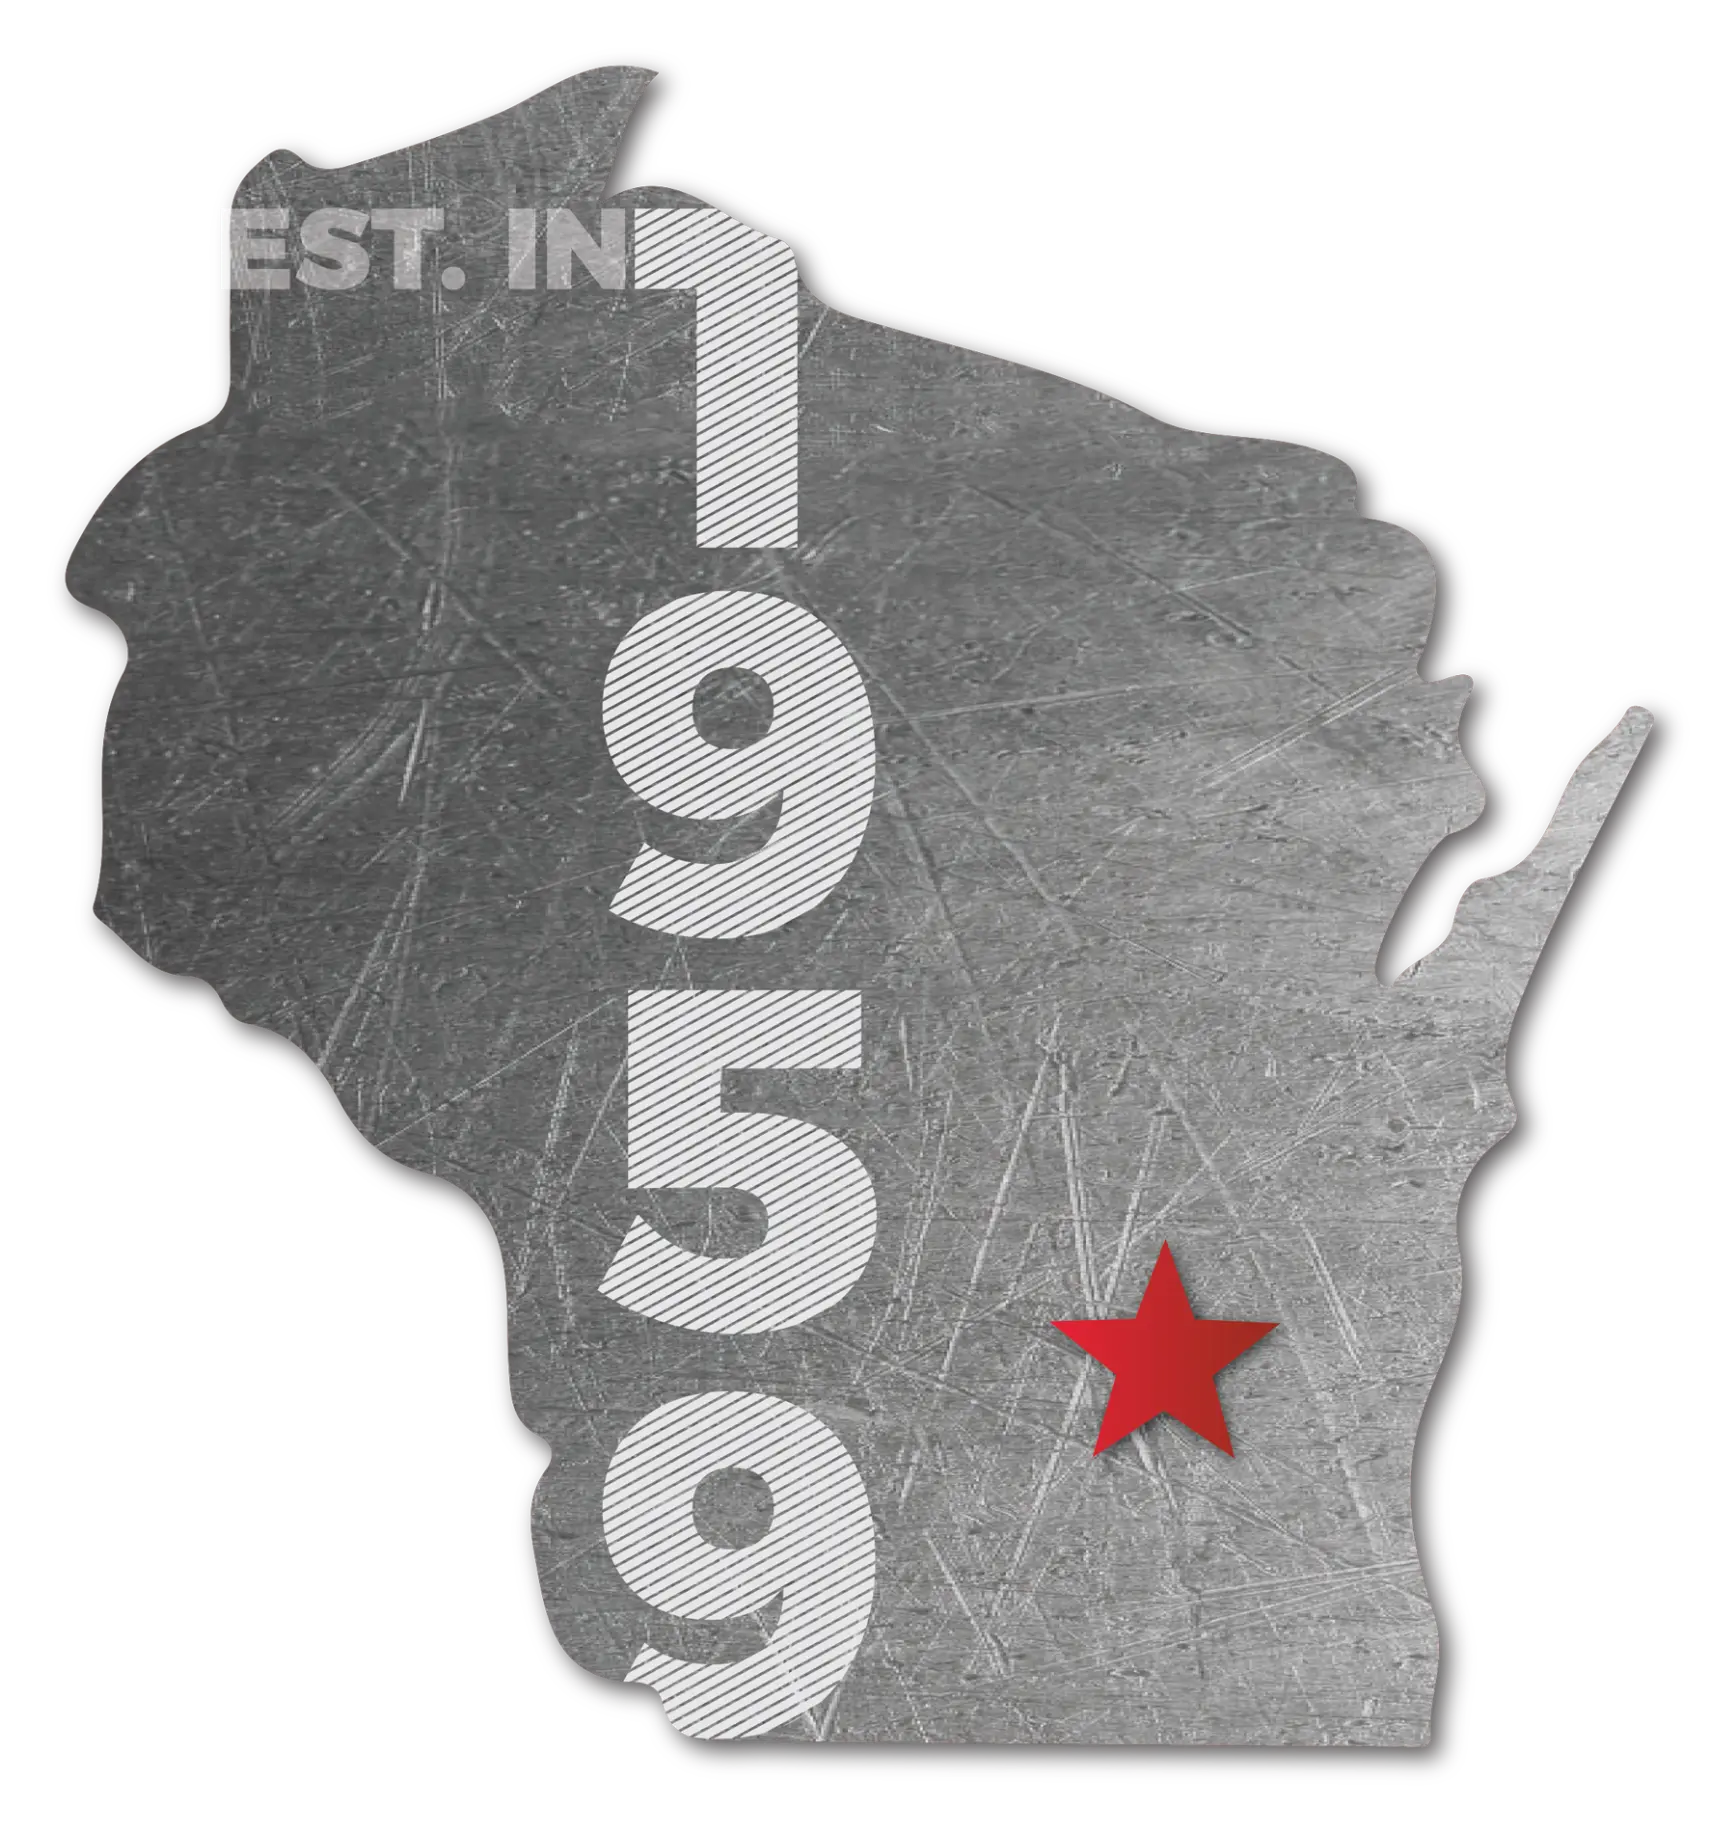 Metal Wisconsin state outline with established 1959 written in the middle.